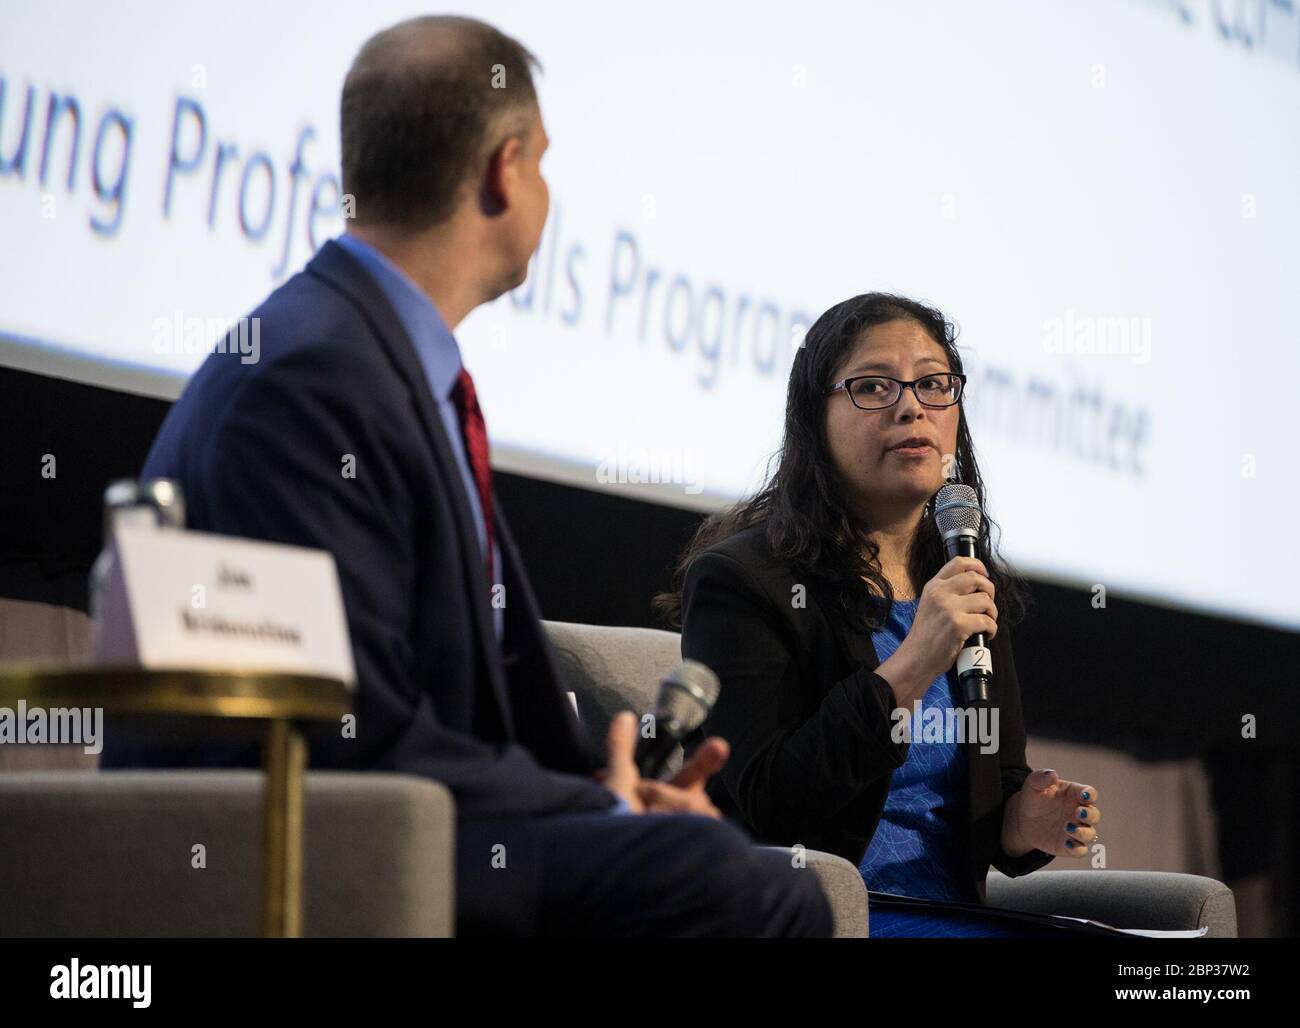 70th International Astronautical Congress  Jackelynne Silva-Martinez, an Aerospace Engineer in Mission Planning Operations at NASA’s Johnson Space Center, right, asks NASA Administrator Jim Bridenstine a question during the Global Networking Forum Young Professionals Town Hall at the 70th International Astronautical Congress, Wednesday, Oct. 23, 2019 at the Walter E. Washington Convention Center in Washington. Stock Photo